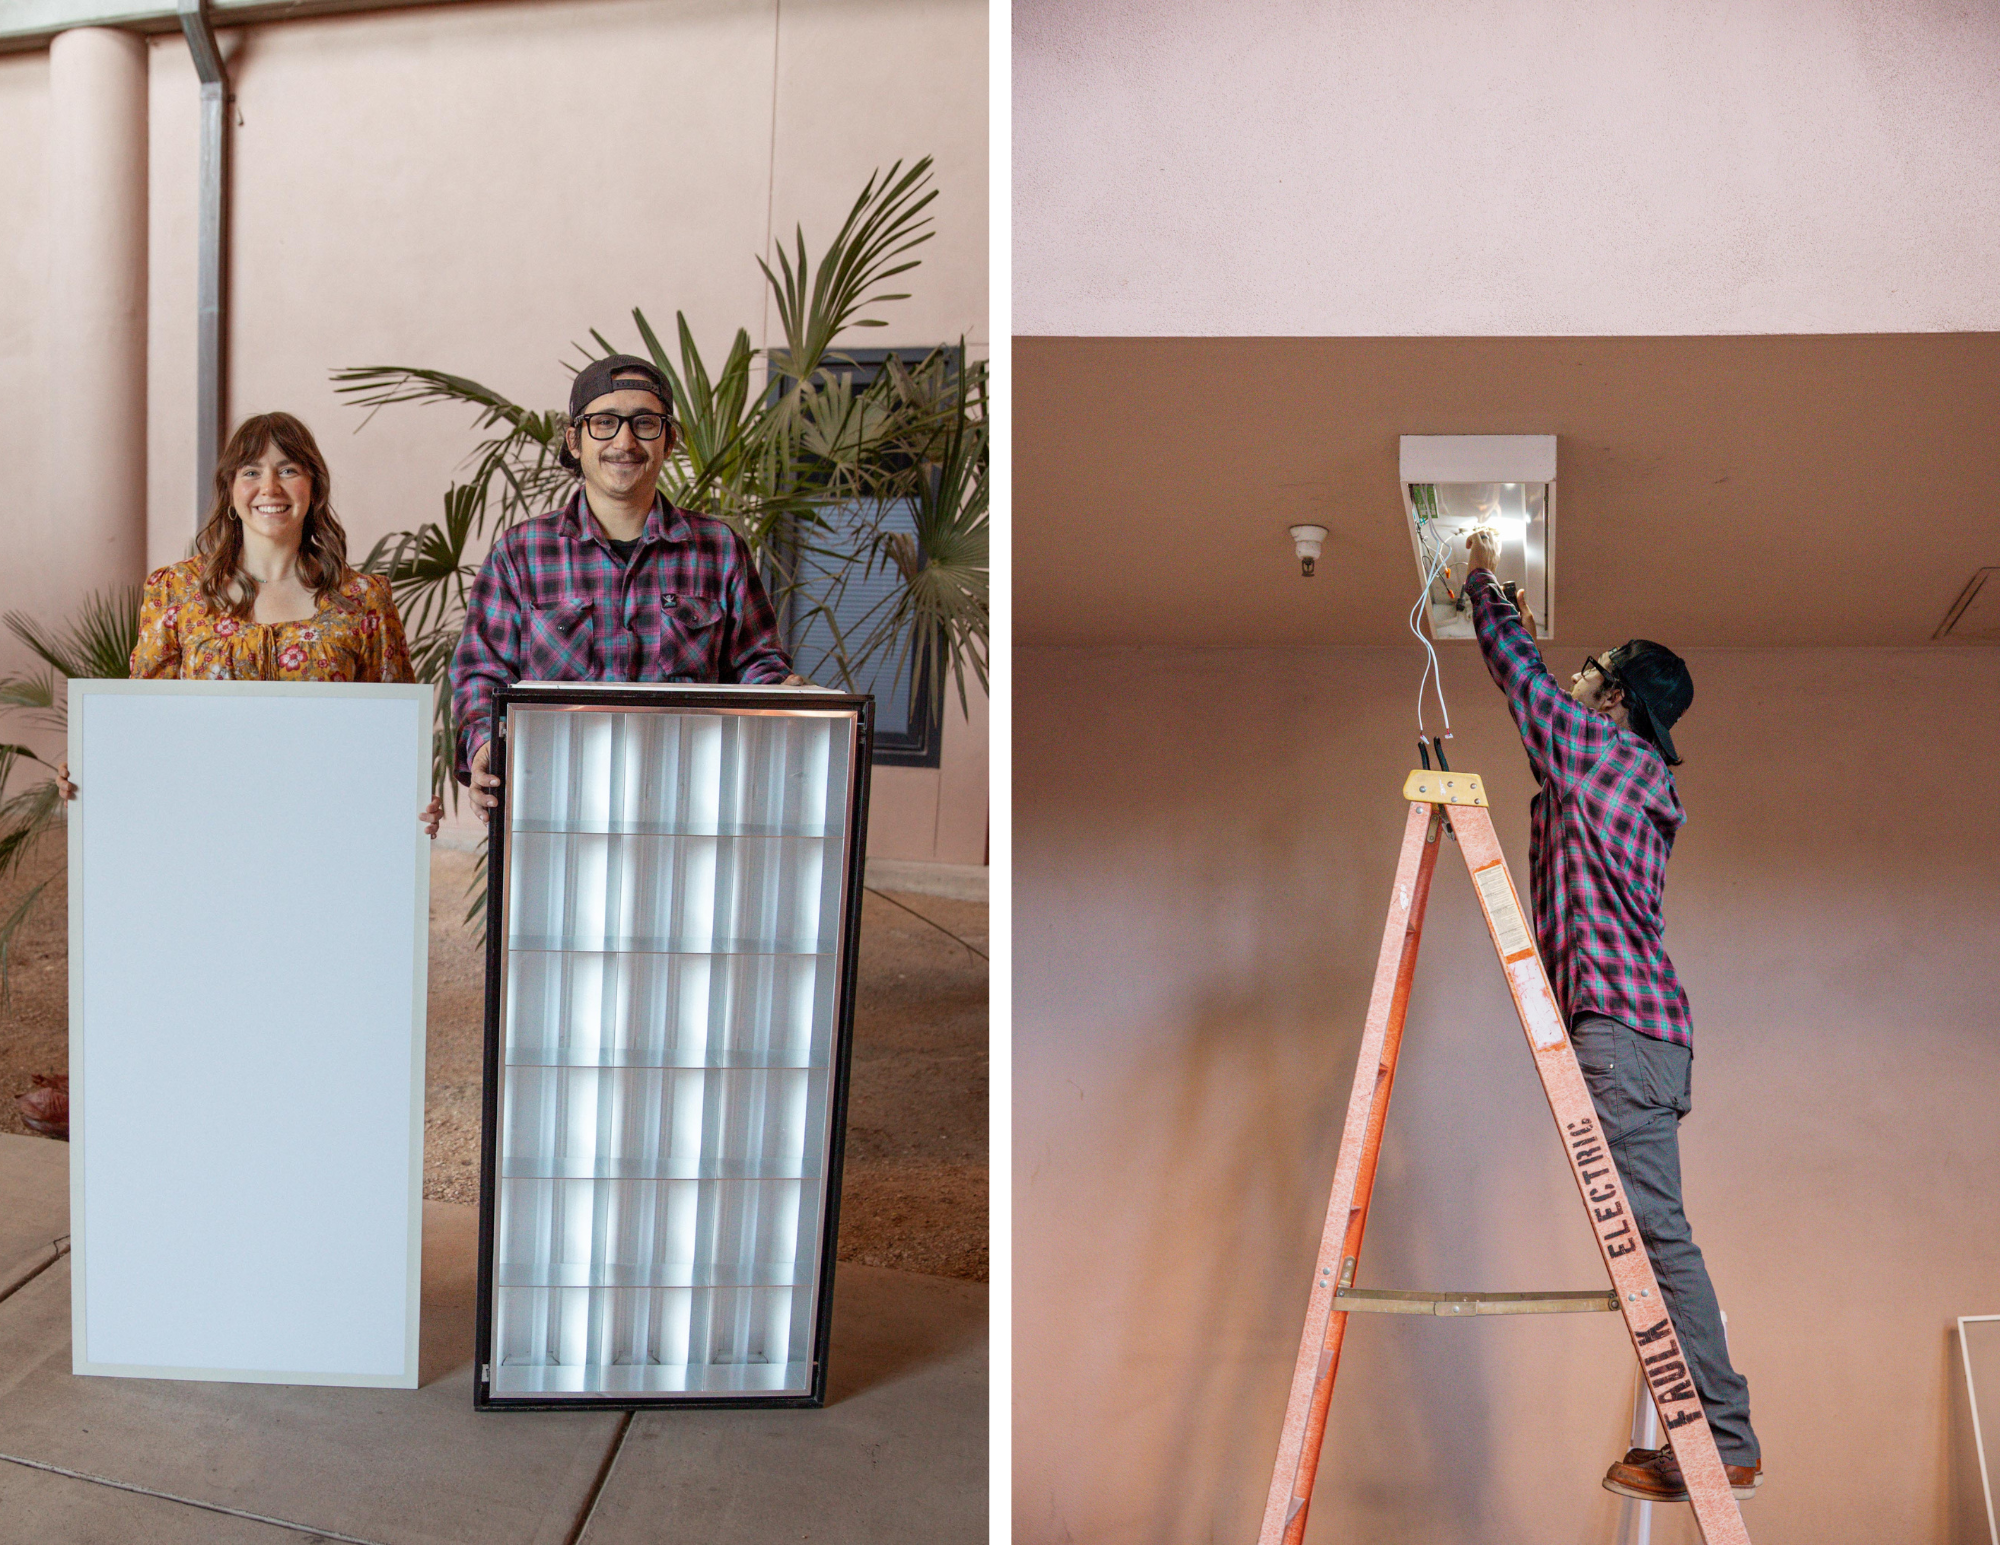 Photo on left: a man and a woman stand together holding the new lighting fixtures. Photo on right: a man stands on a ladder and installs a lighting fixture.